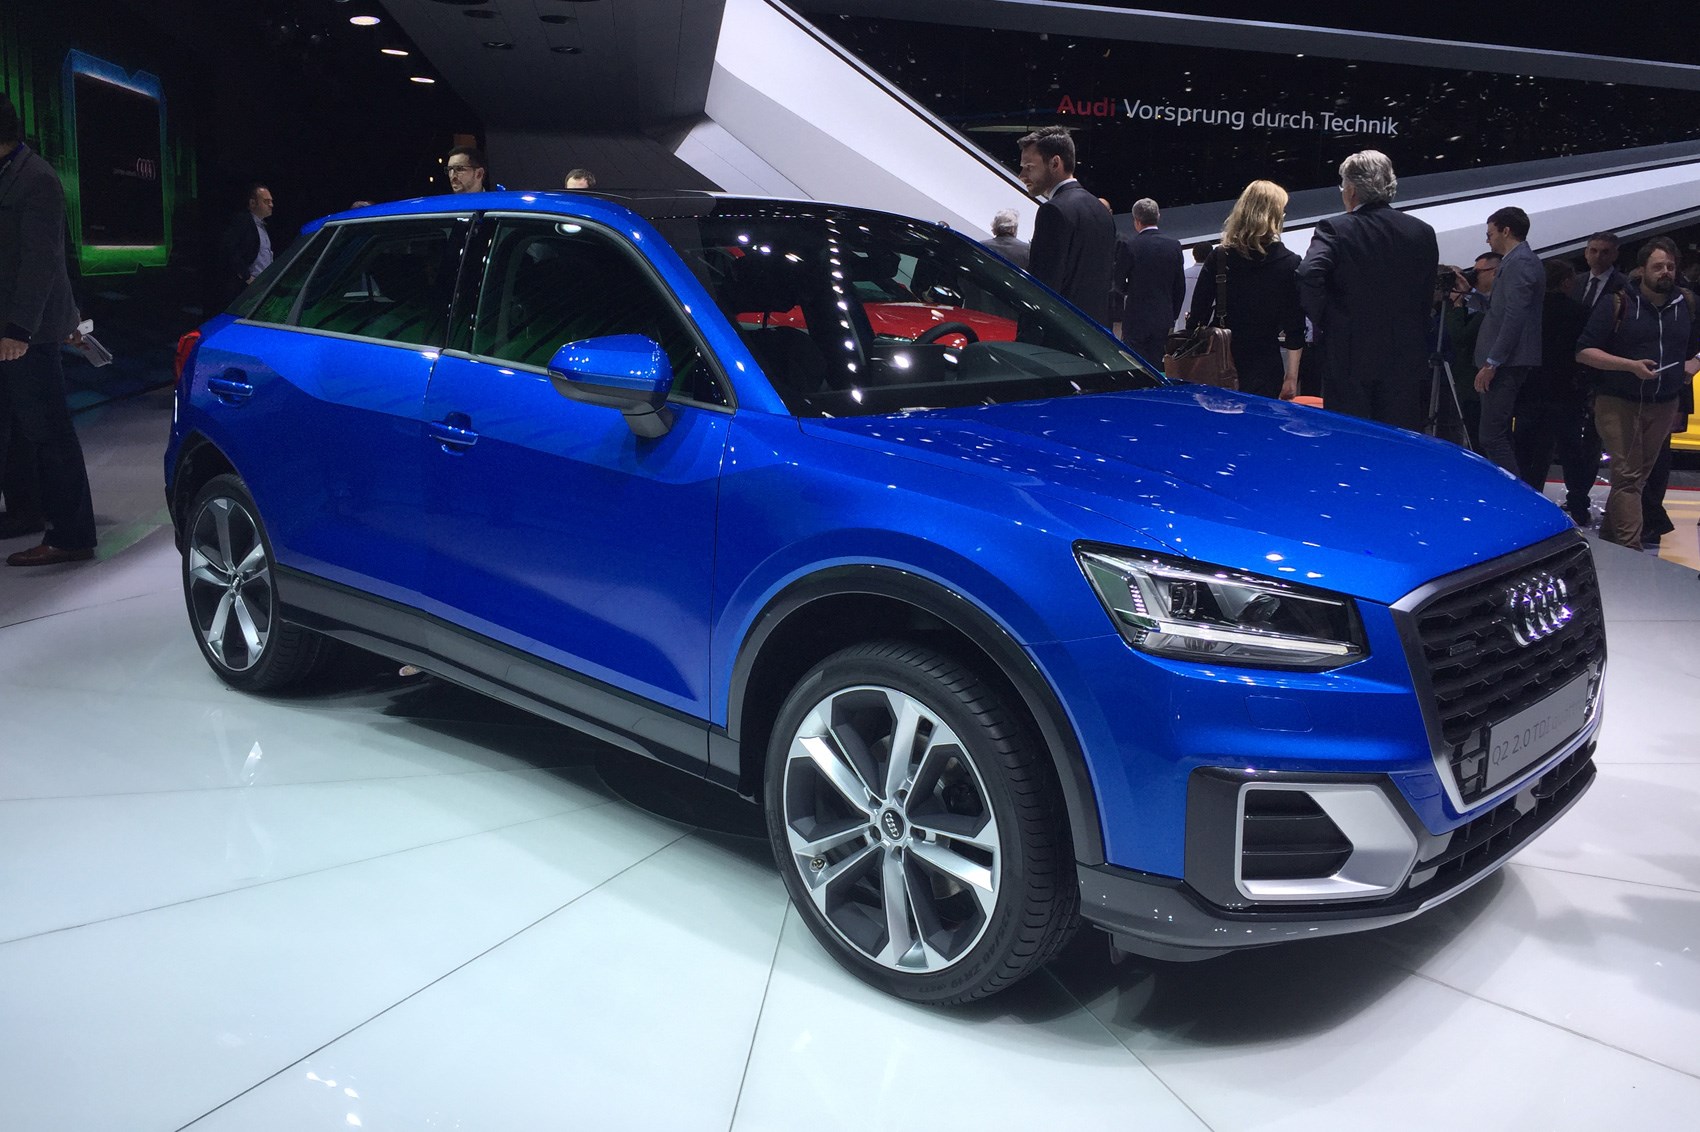 Audi Q2 in pictures: new SUV lands at Geneva show